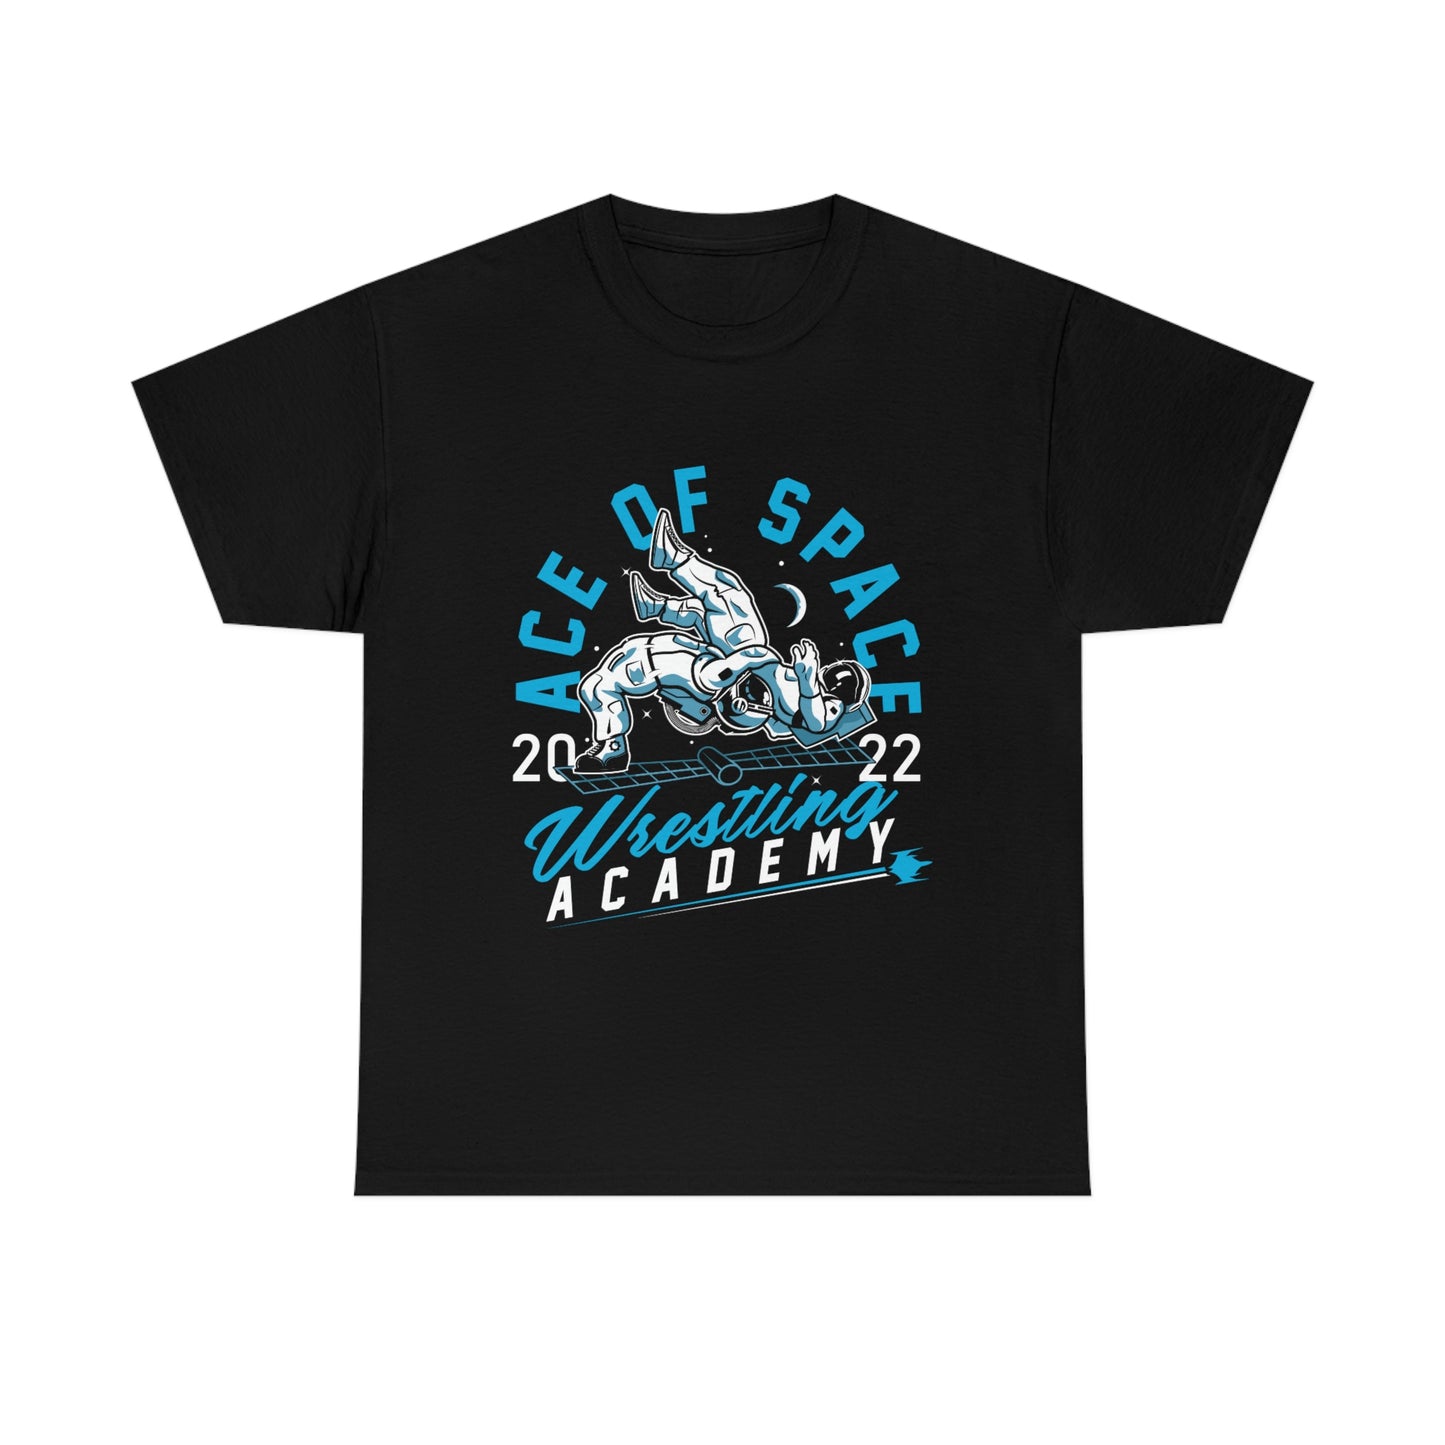 ACE OF SPACE WRESTLING ACADEMY EST. 2022 T-SHIRT - LSG